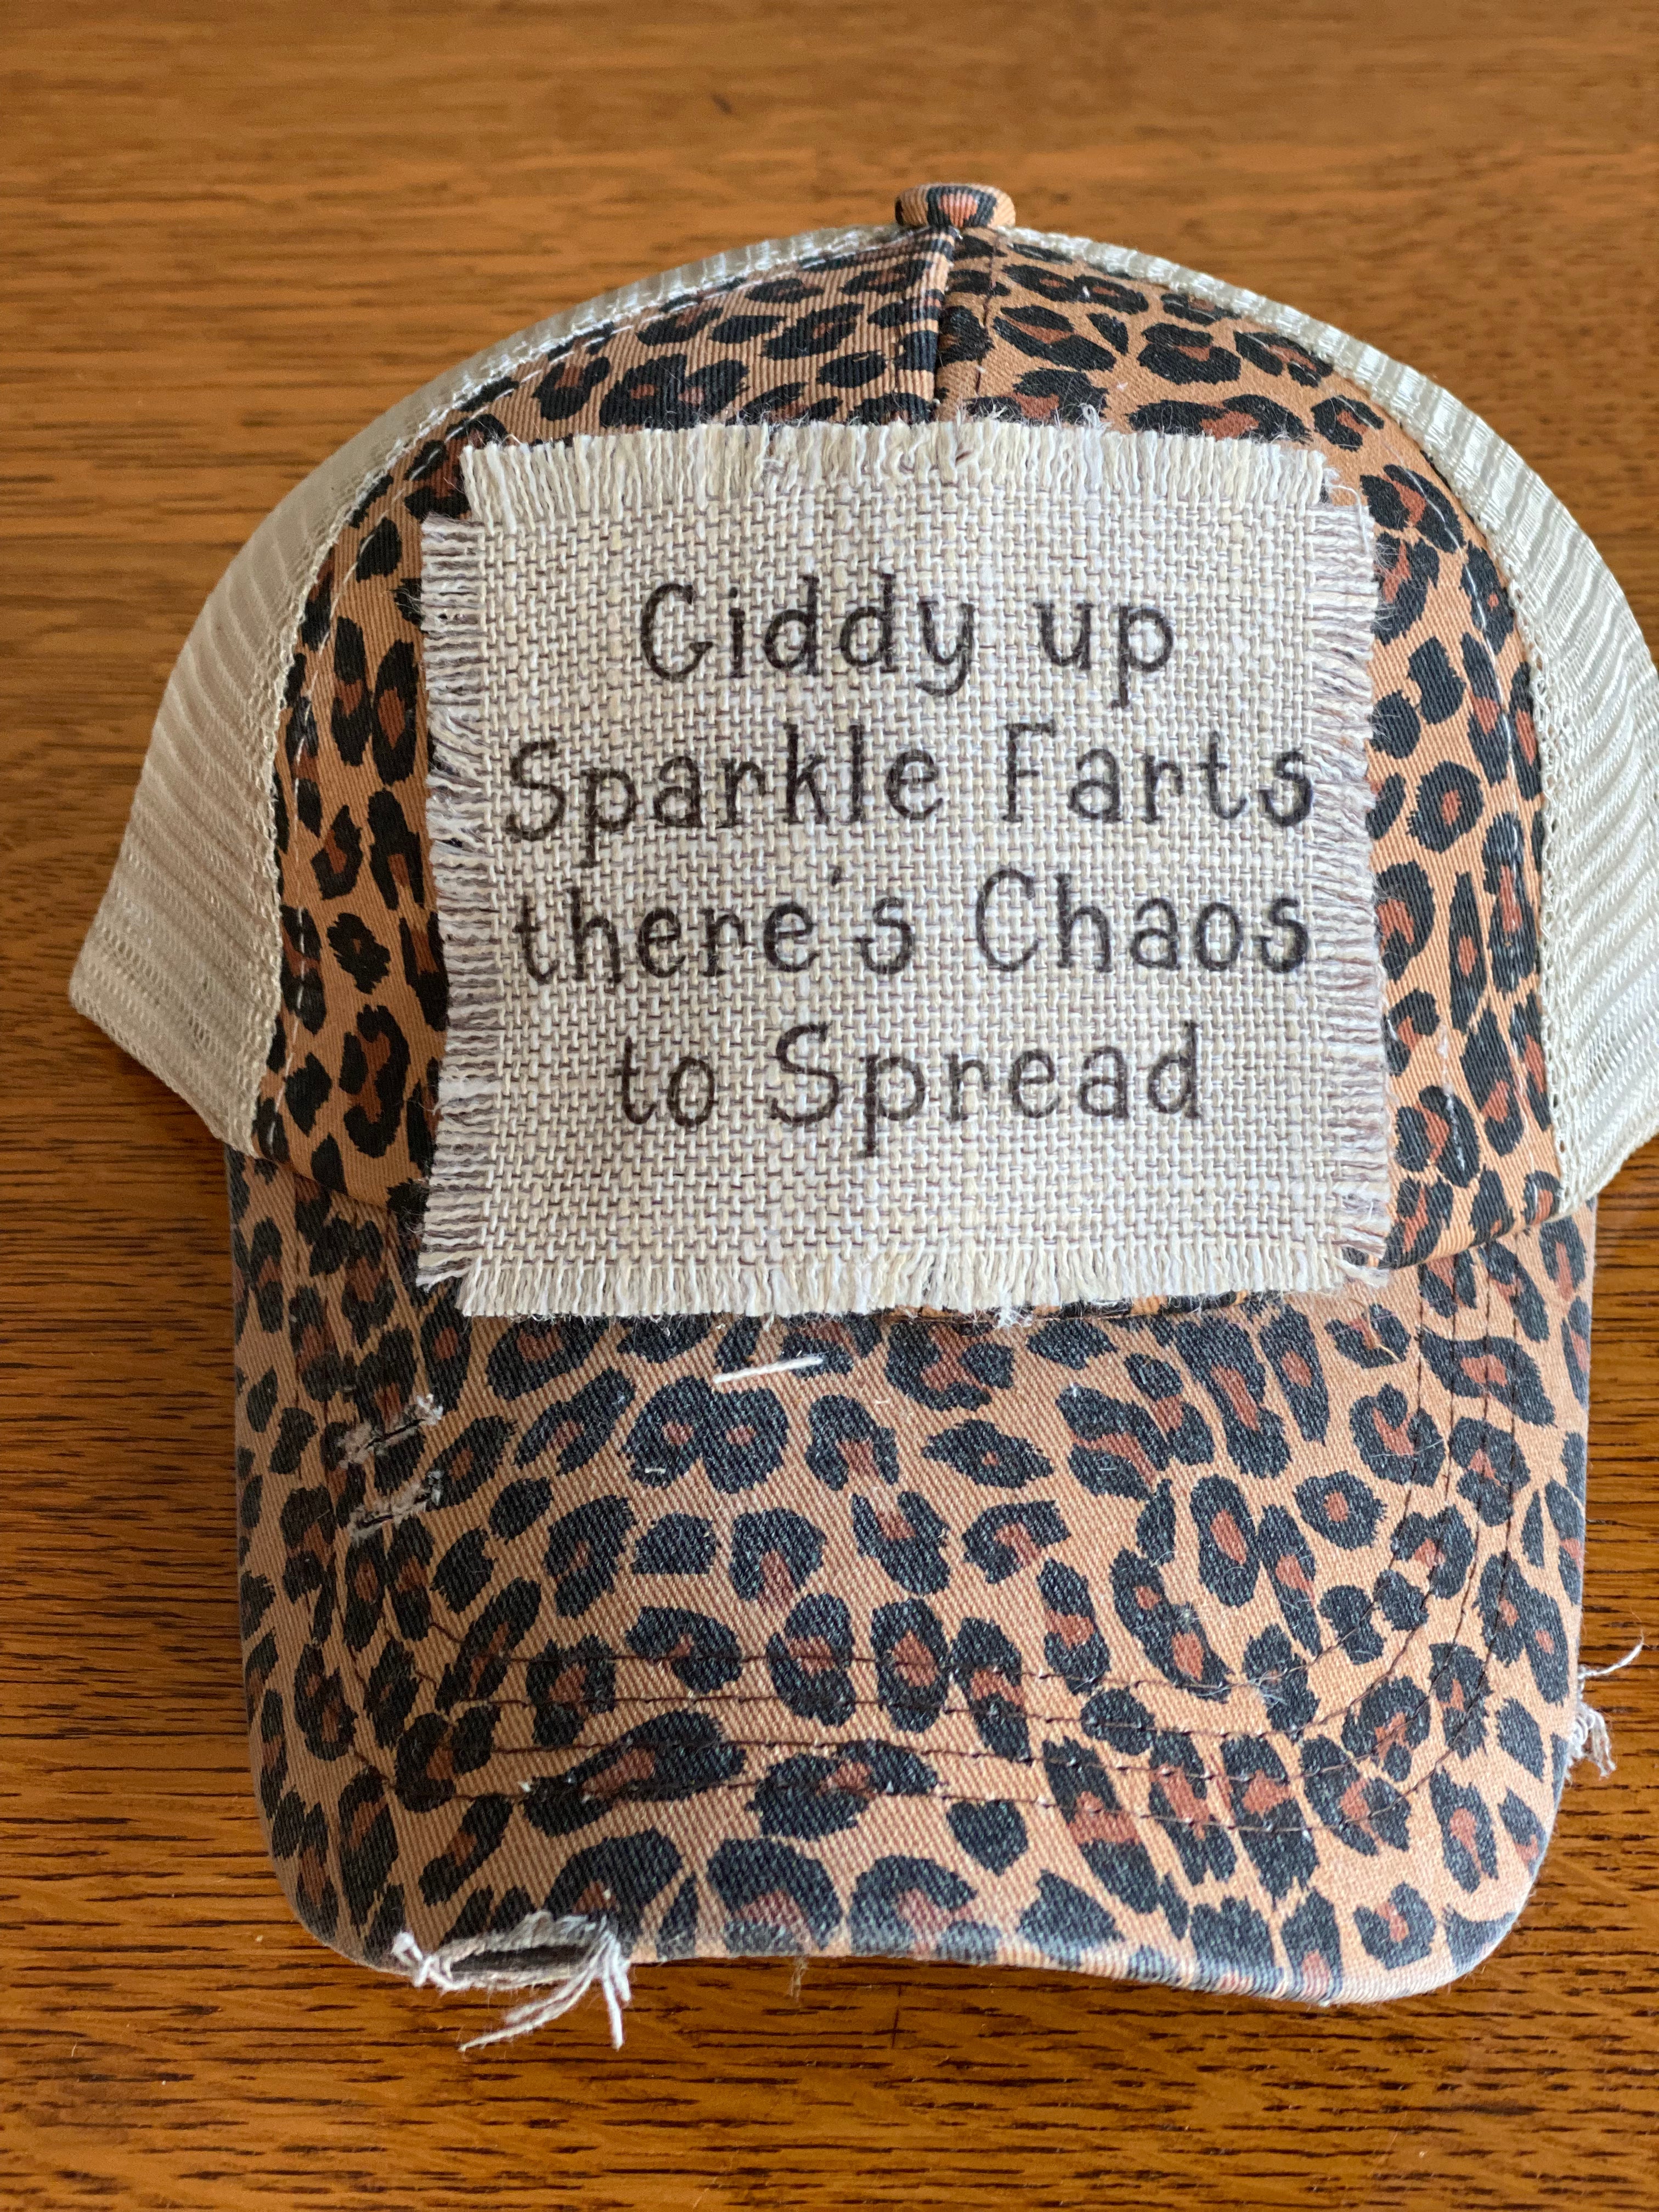 Giddy Up Sparkle Farts There's Chaos To Spread Mesh Trucker Ponytail Baseball Hat Cap with Raggedy Patch